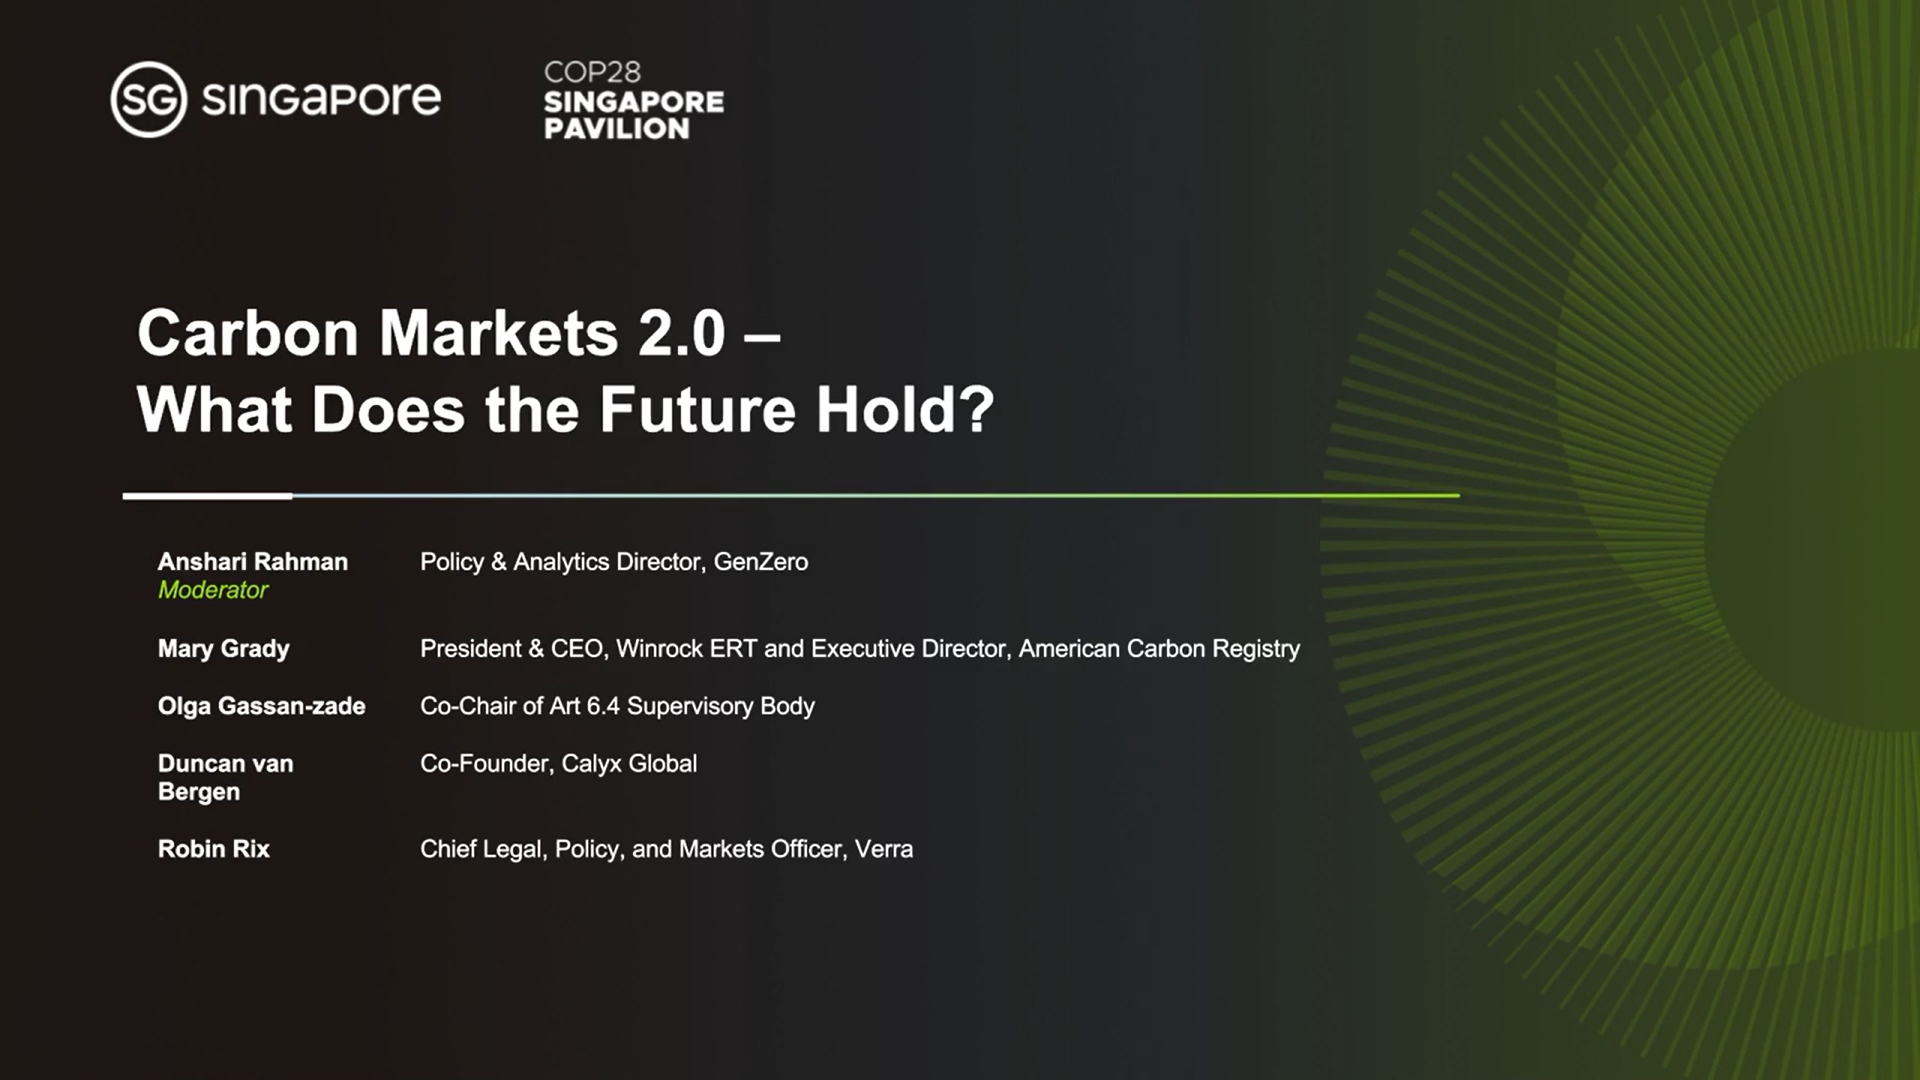 Carbon Markets 2.0 - What Does the Future Hold?